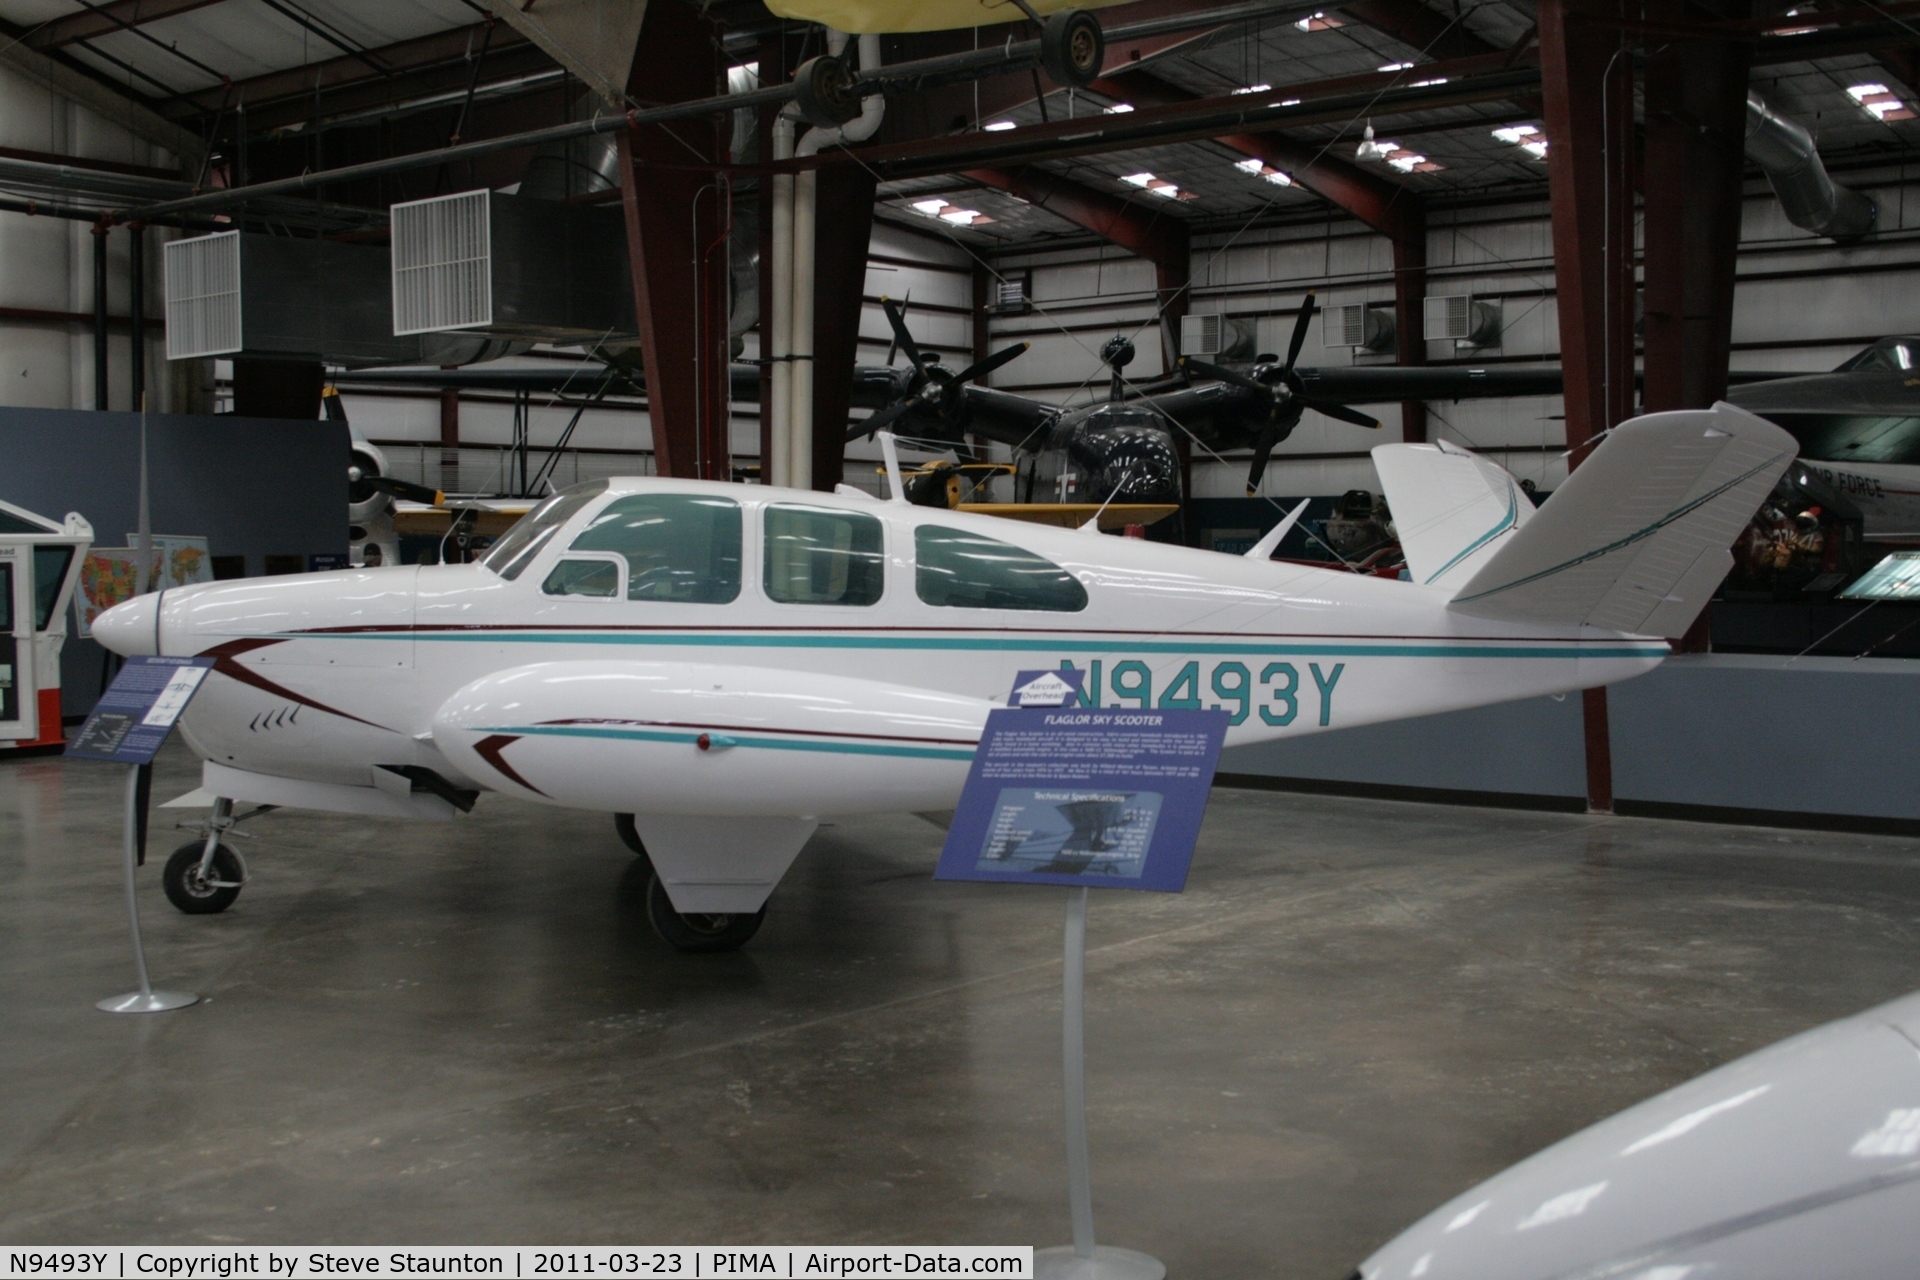 N9493Y, Beech N35 Bonanza C/N D-6668, Taken at Pima Air and Space Museum, in March 2011 whilst on an Aeroprint Aviation tour